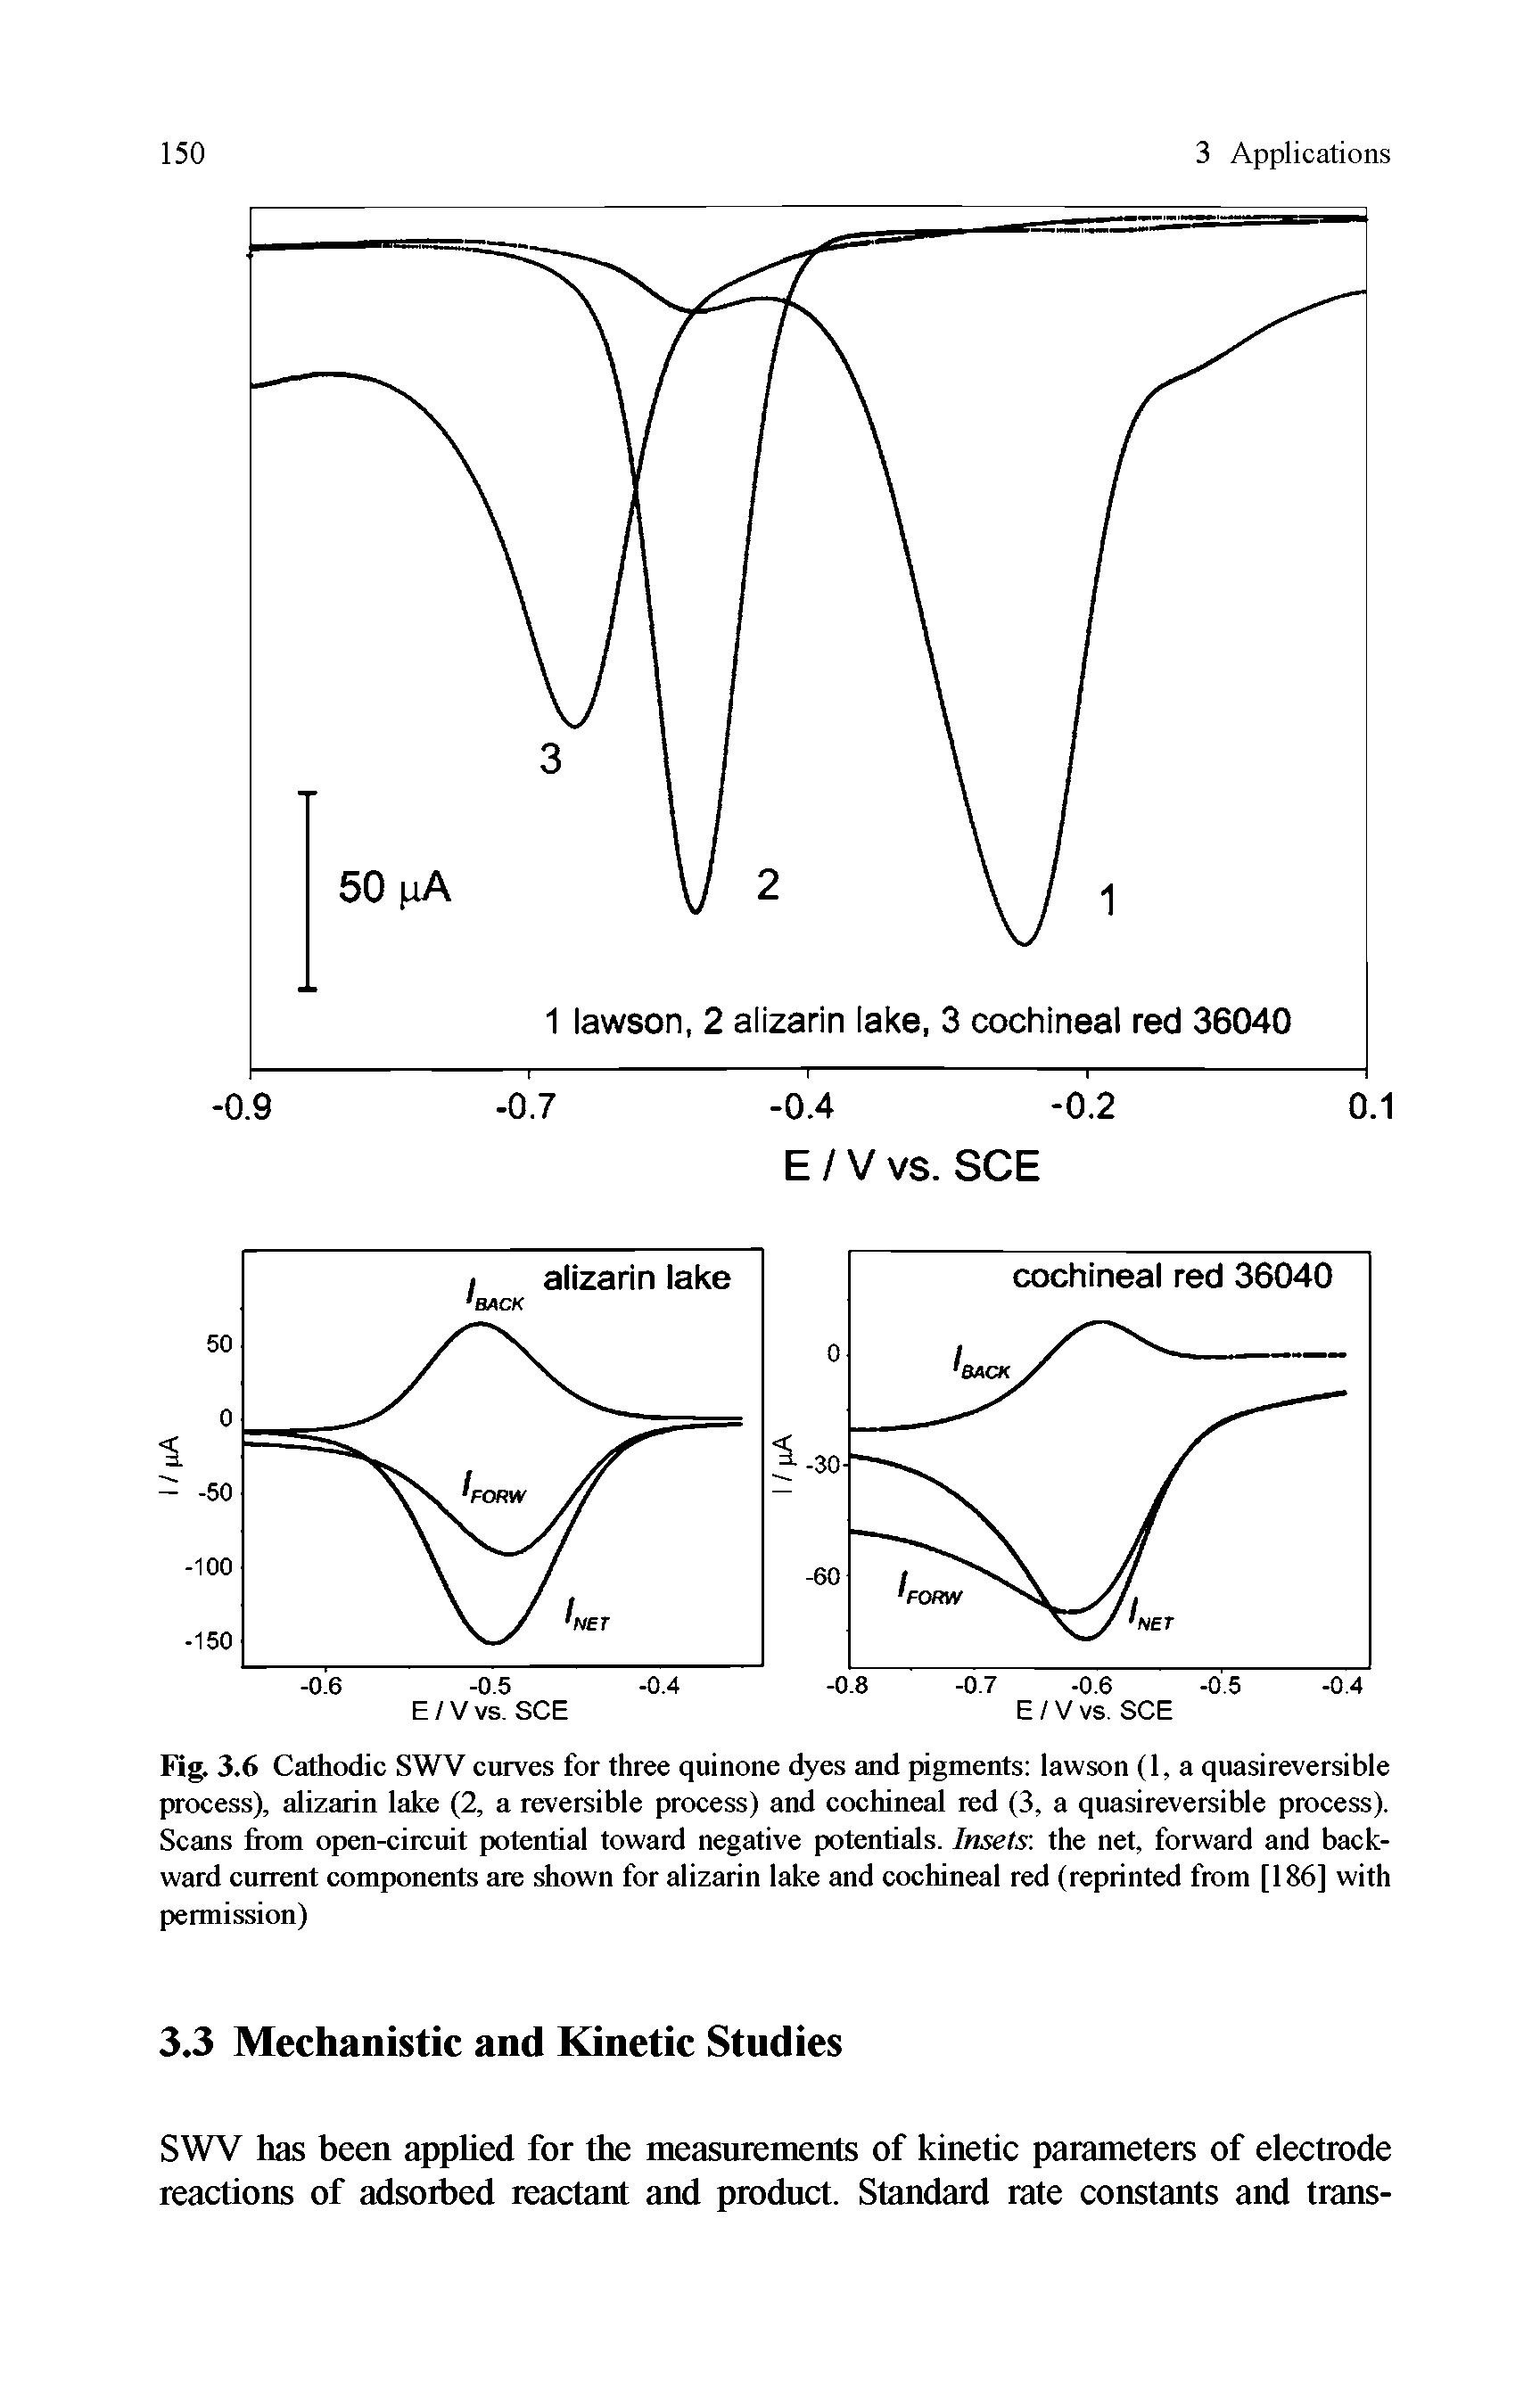 Fig. 3.6 Cathodic SWV curves for three quinone dyes and pigments lawson (1, a quasireversible process), alizarin lake (2, a reversible process) and cochineal red (3, a quasireversible process). Scans from open-circuit potential toward negative potentials. Insets the net, forward and backward current components are shown for alizarin lake and cochineal red (reprinted from [186] with permission)...